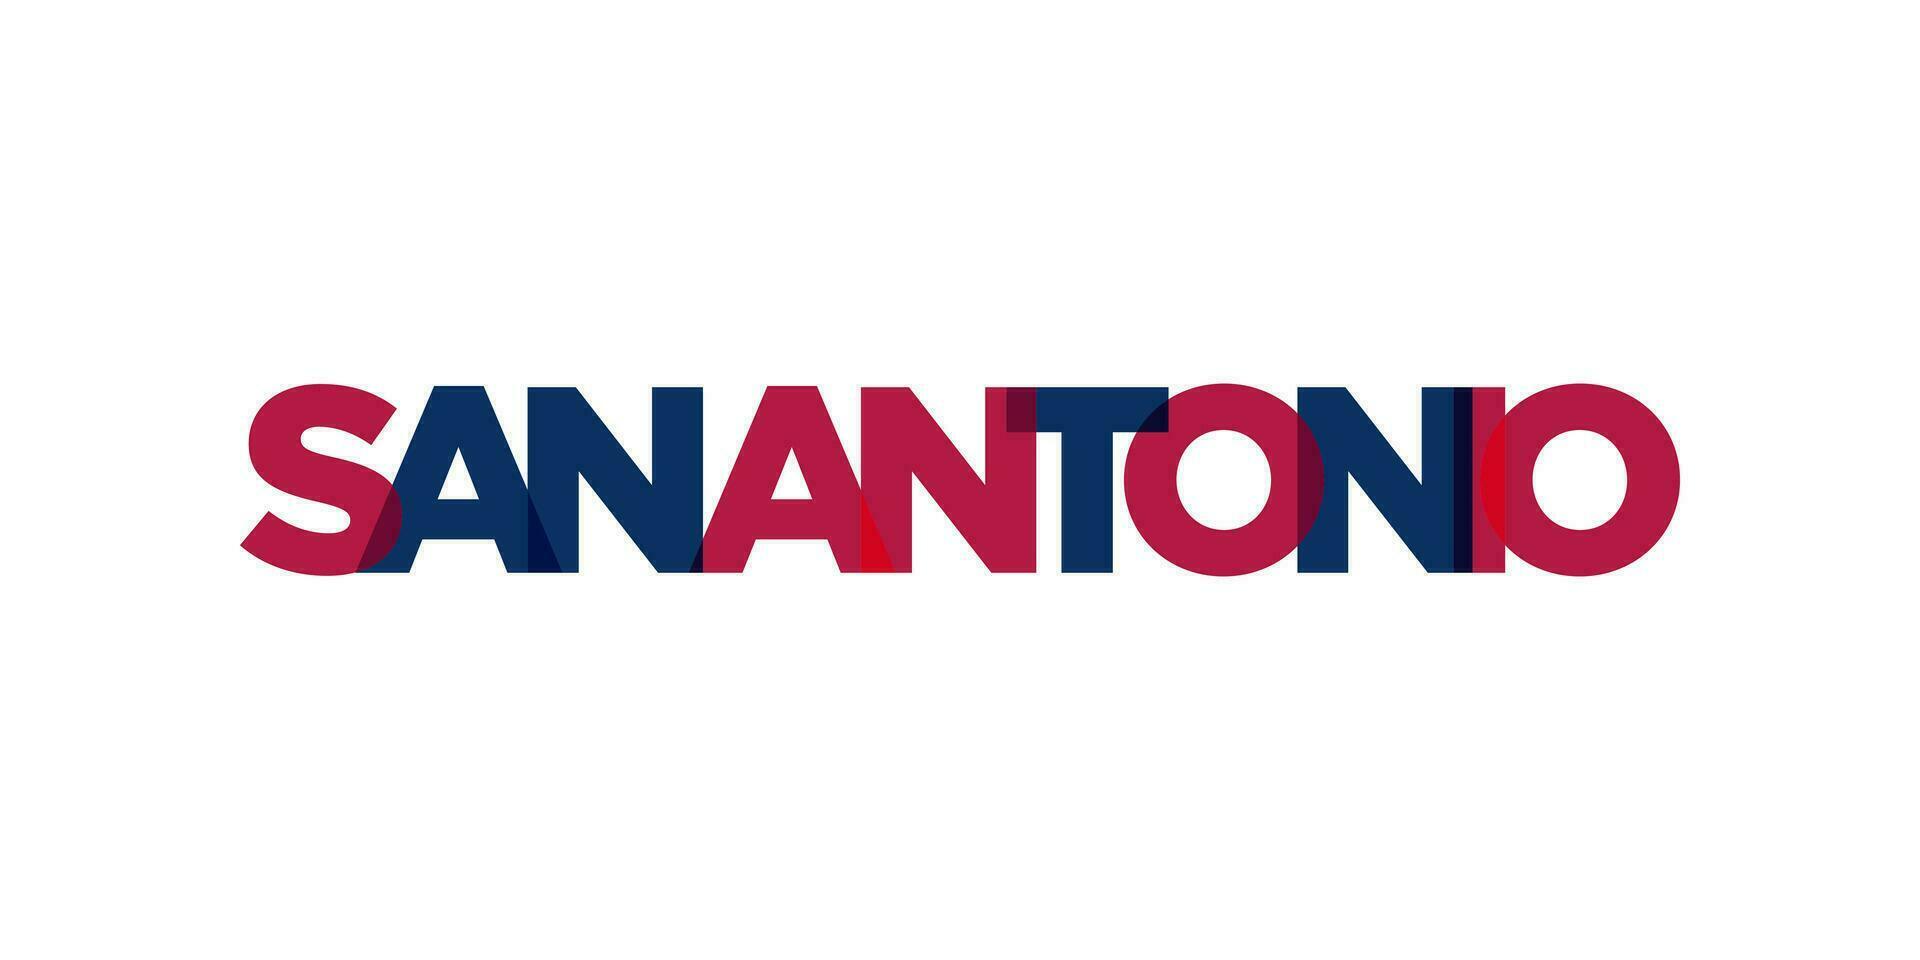 San Antonio, Texas, USA typography slogan design. America logo with graphic city lettering for print and web. vector